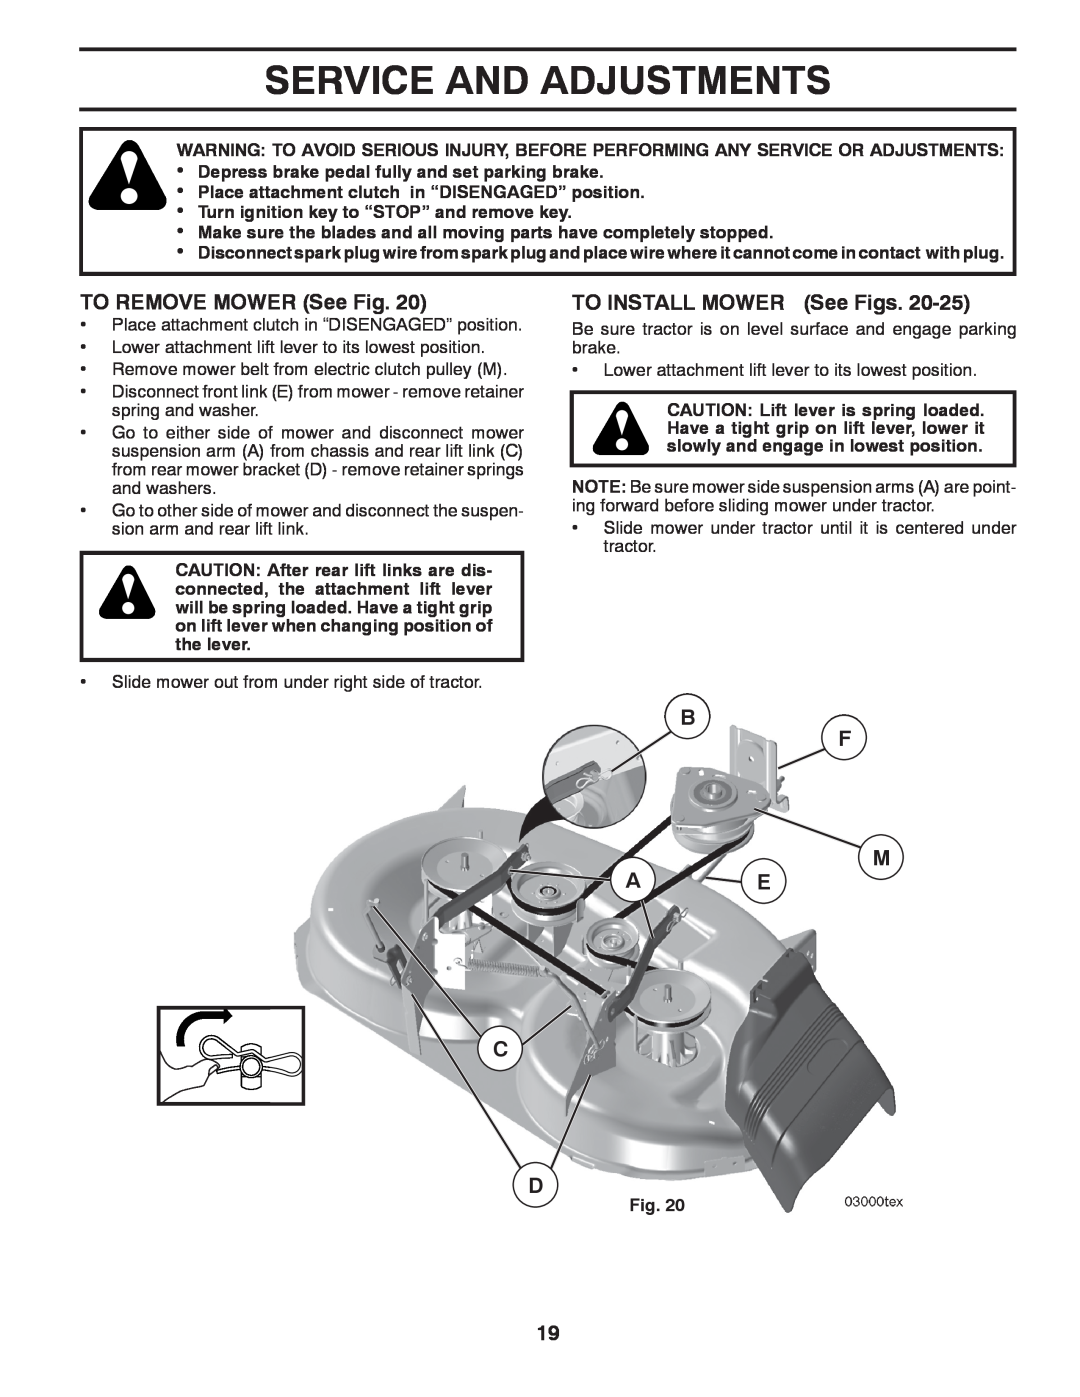 Dixon D22H46, 433616 manual Service And Adjustments, TO REMOVE MOWER See Fig, TO INSTALL MOWER See Figs, M A E C D 